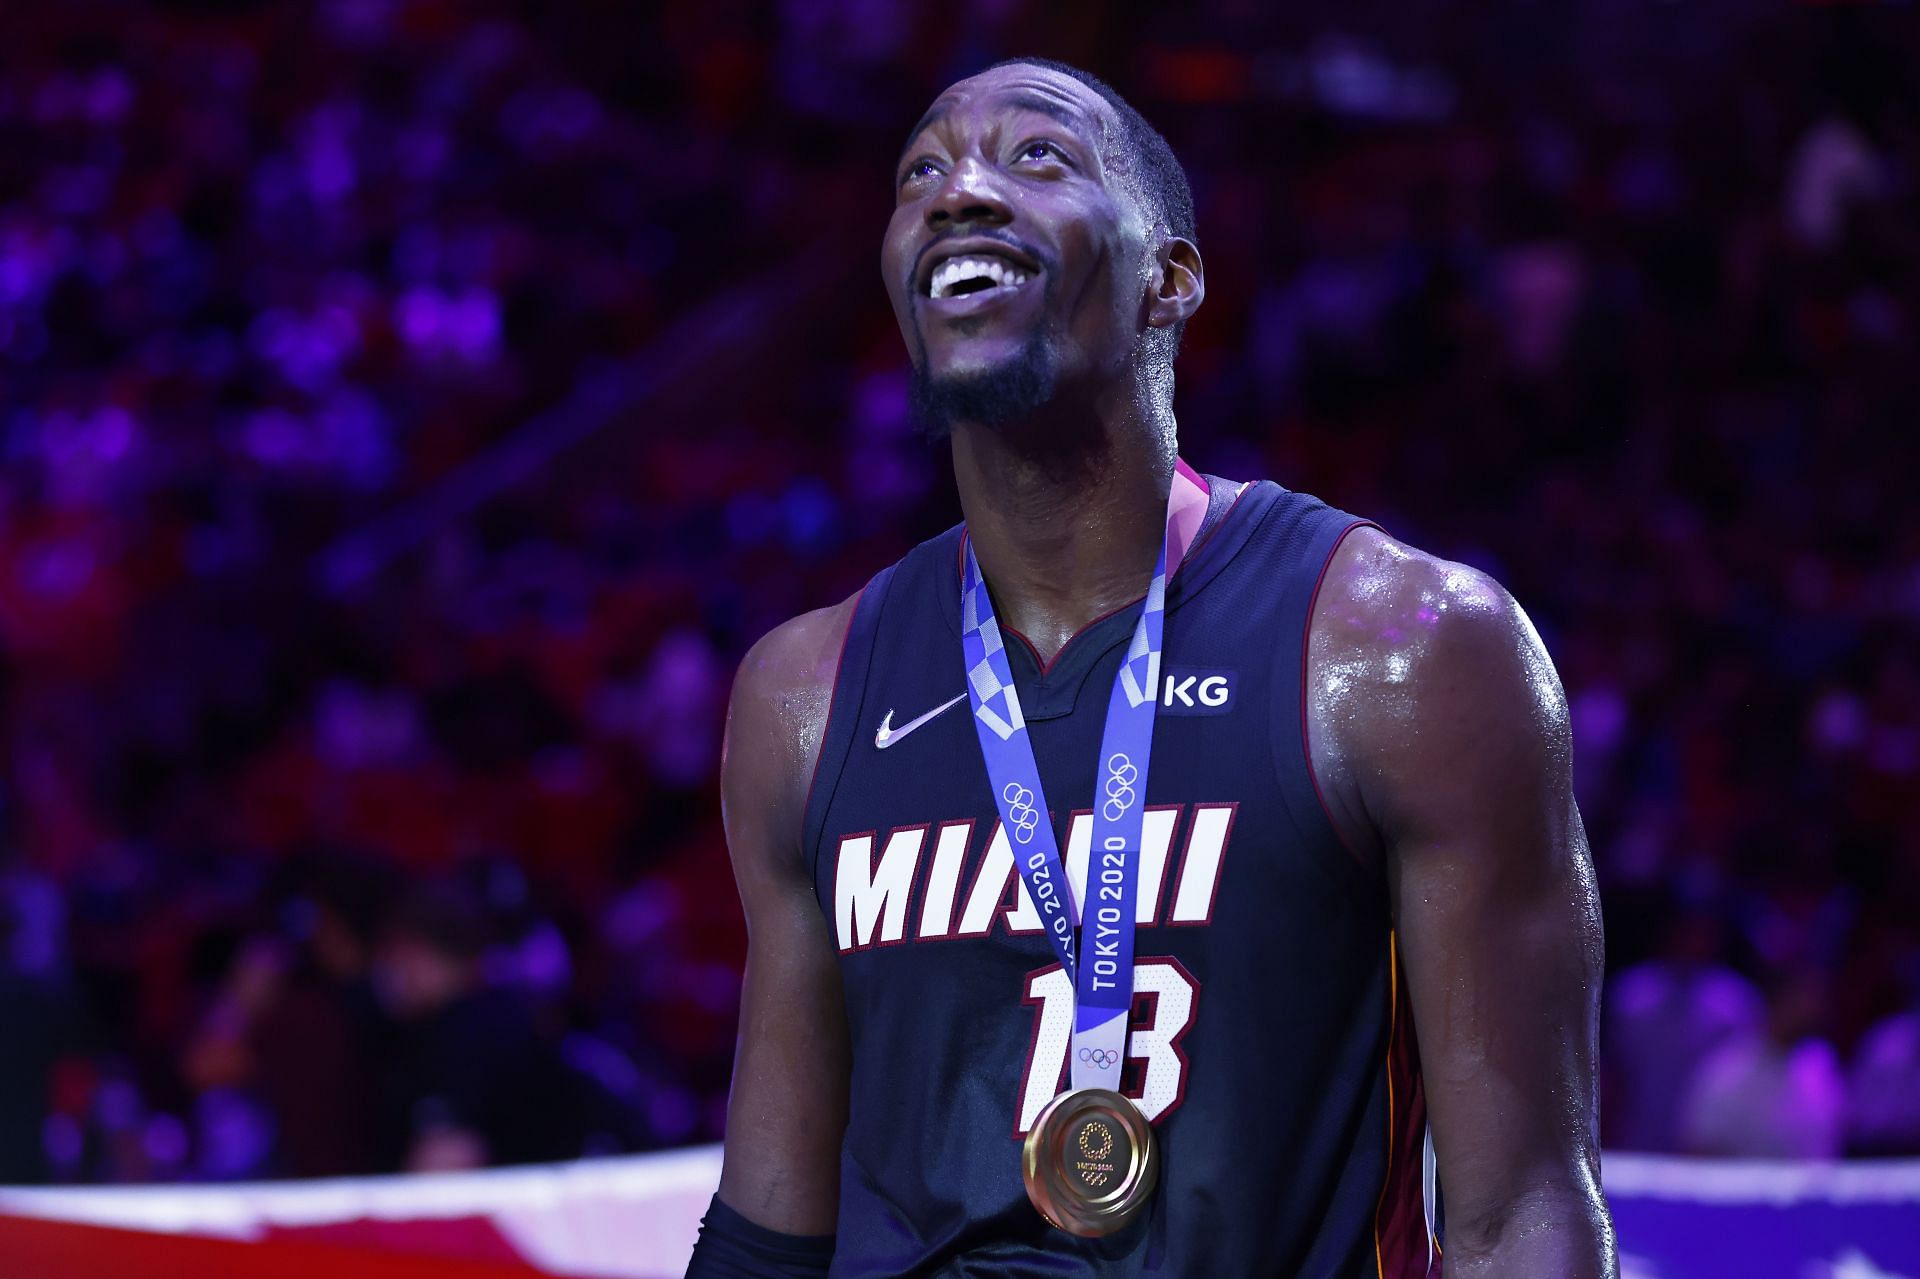 Bam Adebayo of the Miami Heat with his Olympic medal.